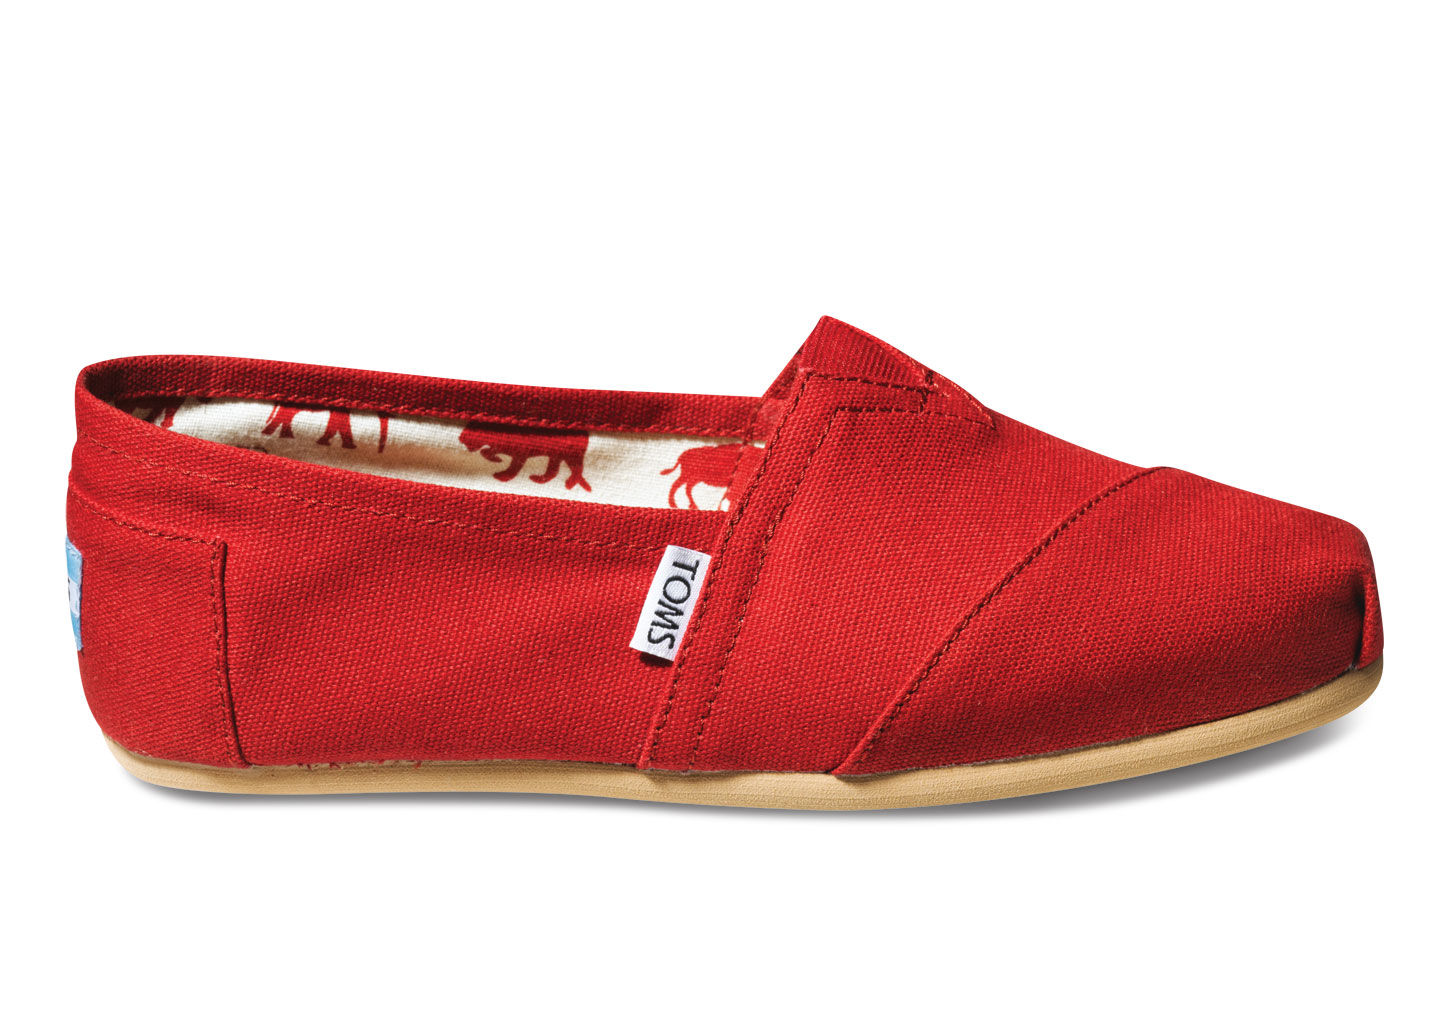 Toms Classic Canvas Women's Shoes, Red